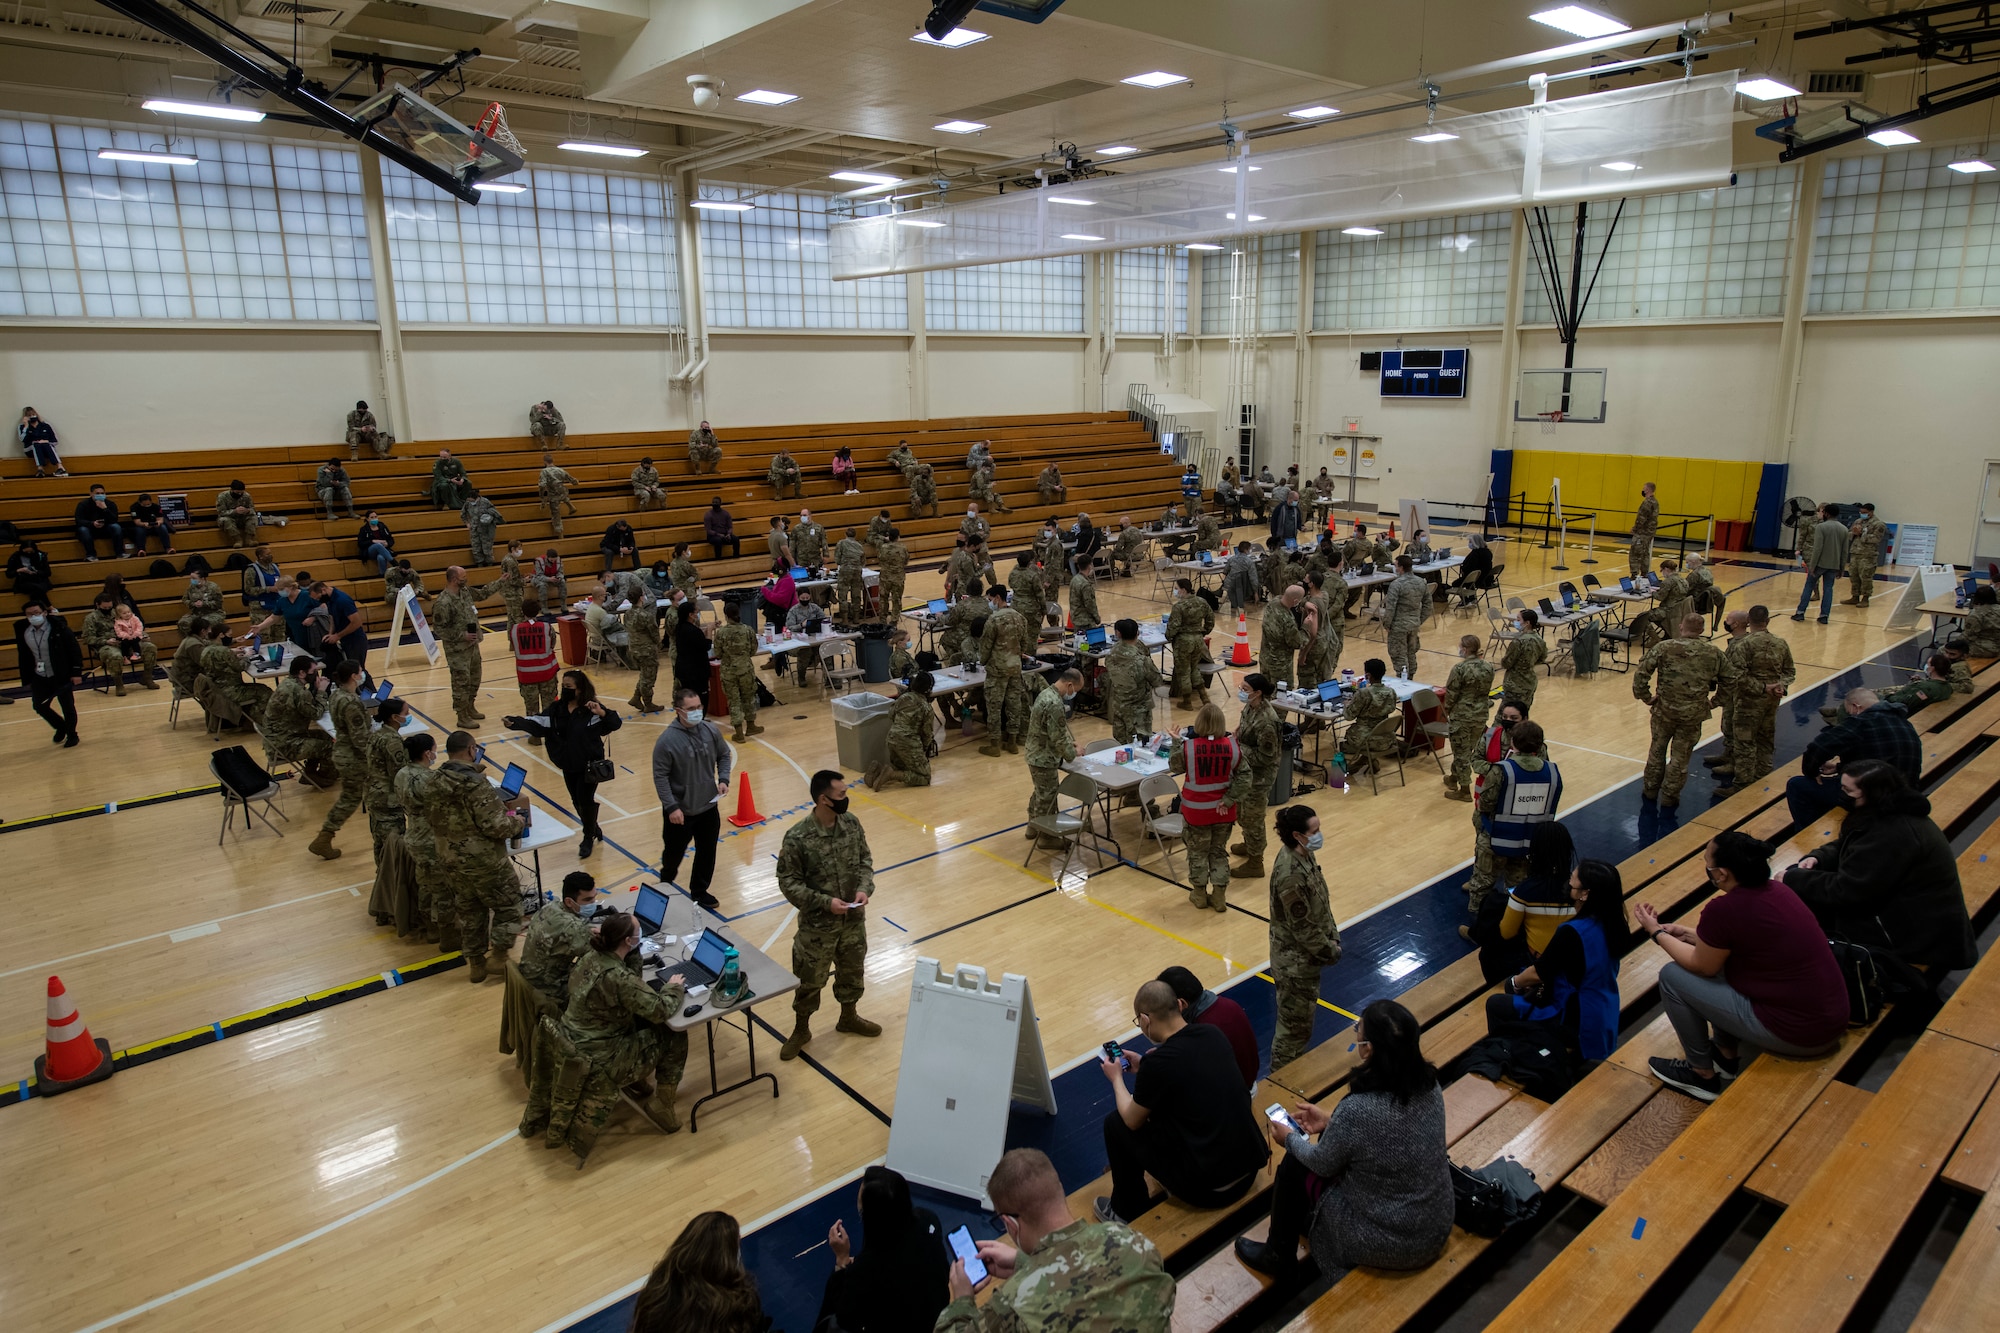 A large gymnasium has many people administering vaccines to people while the bleachers are sporadically covered with various people.